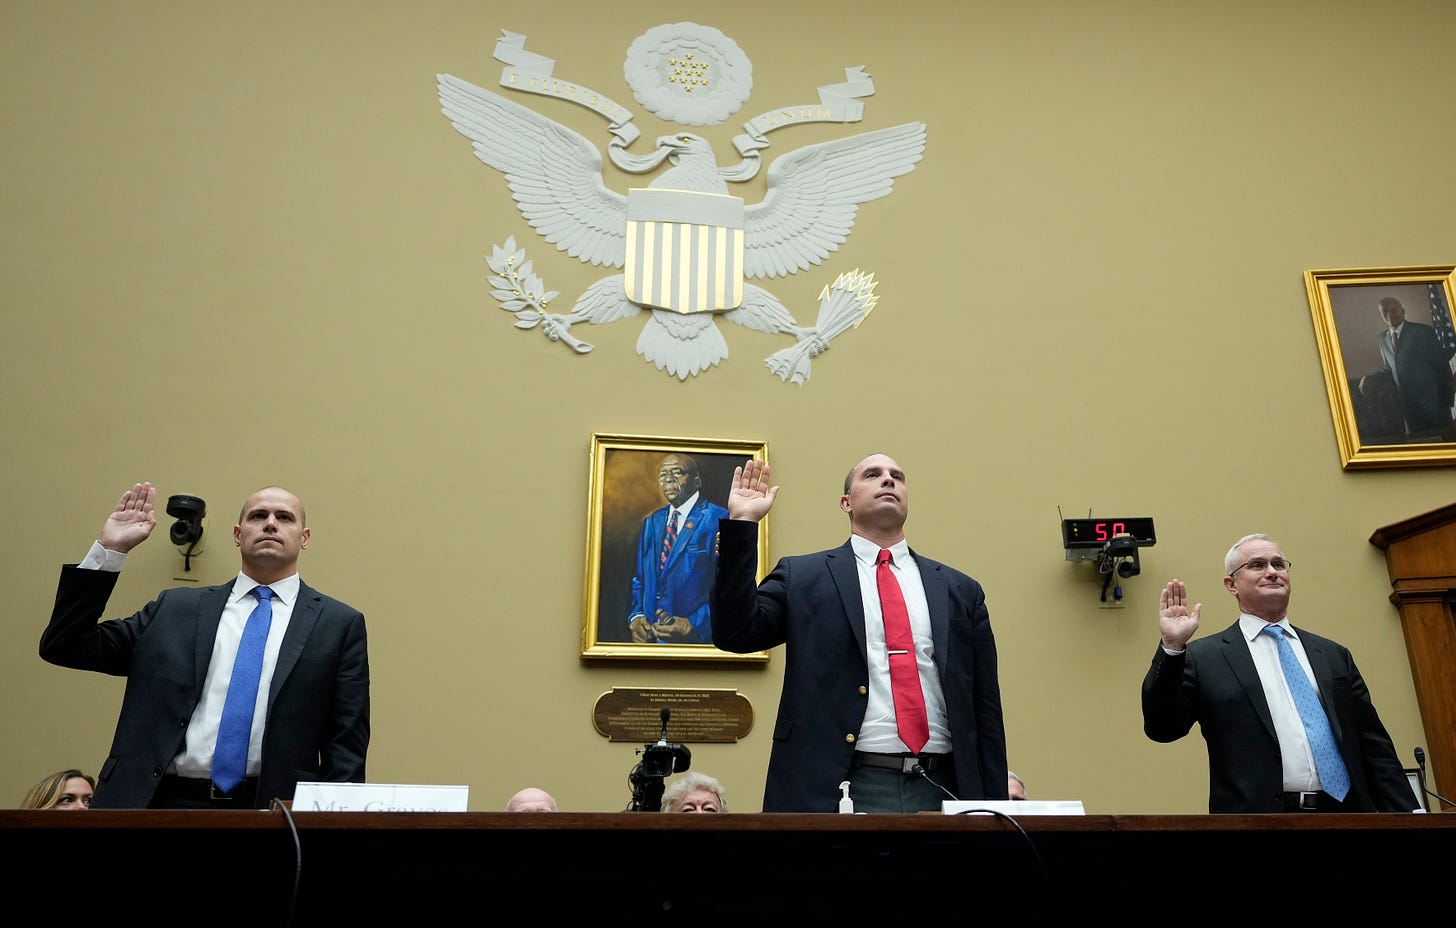 Witnesses swearing in at House Oversight Committee hearing, July 26 (Drew Angerer via Getty Images).